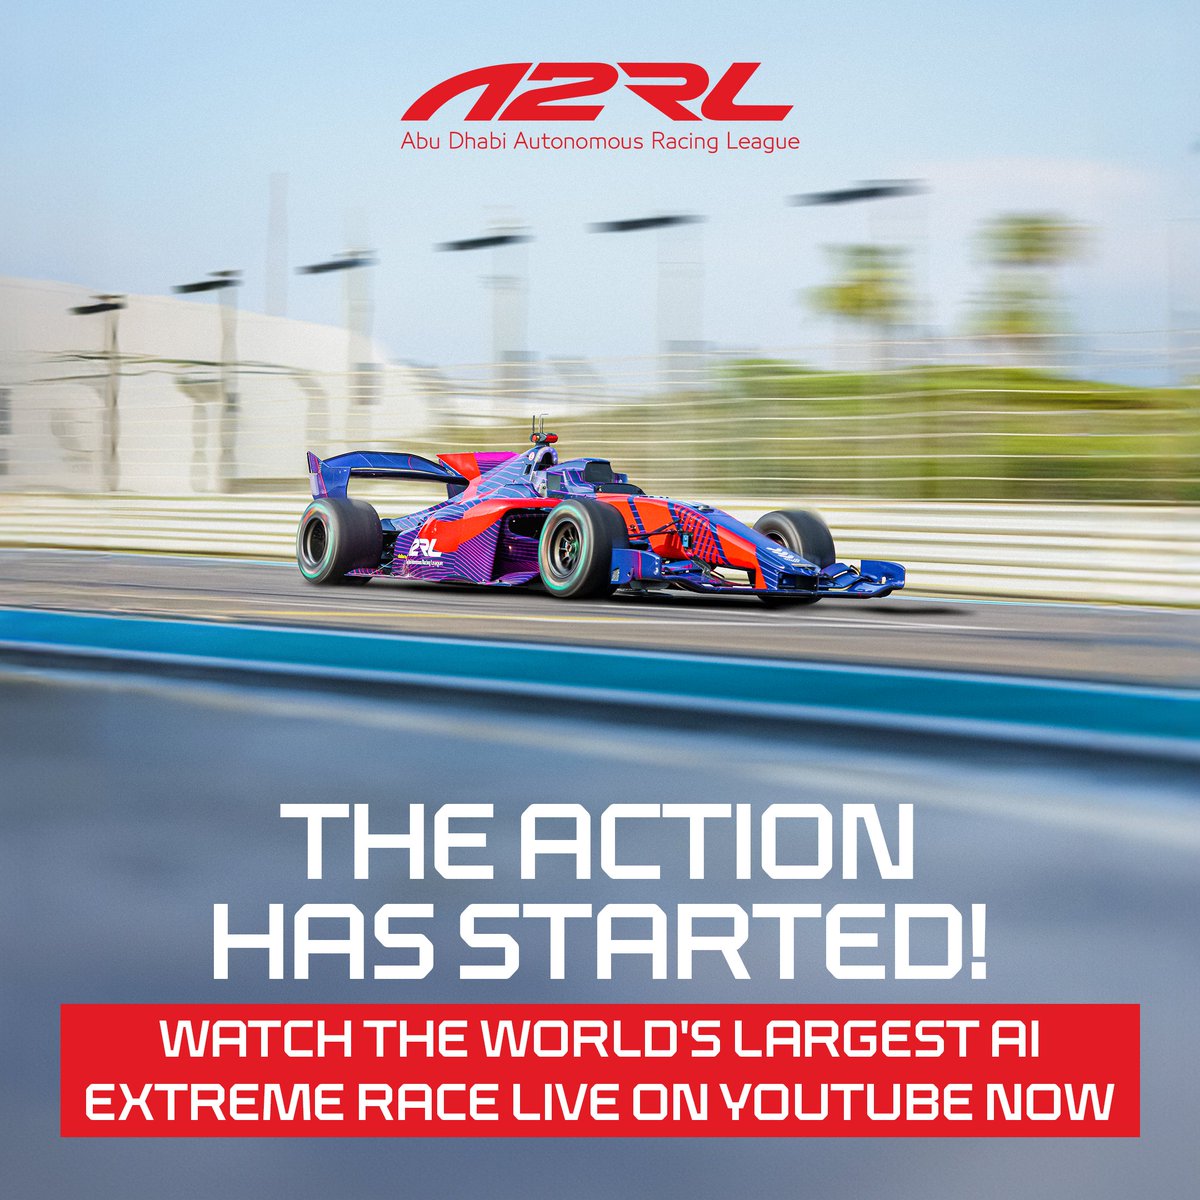 🏁 The race is on! Don’t miss out on the A2RL’s extreme autonomous race happening now at Yas Marina Circuit. Are you watching? Stream it live and see the future of mobility in action! 📺 Live stream here: youtube.com/live/TPzBH-7ck… #A2RL #ASPIREUAE #AutonomousRacing #Innovation